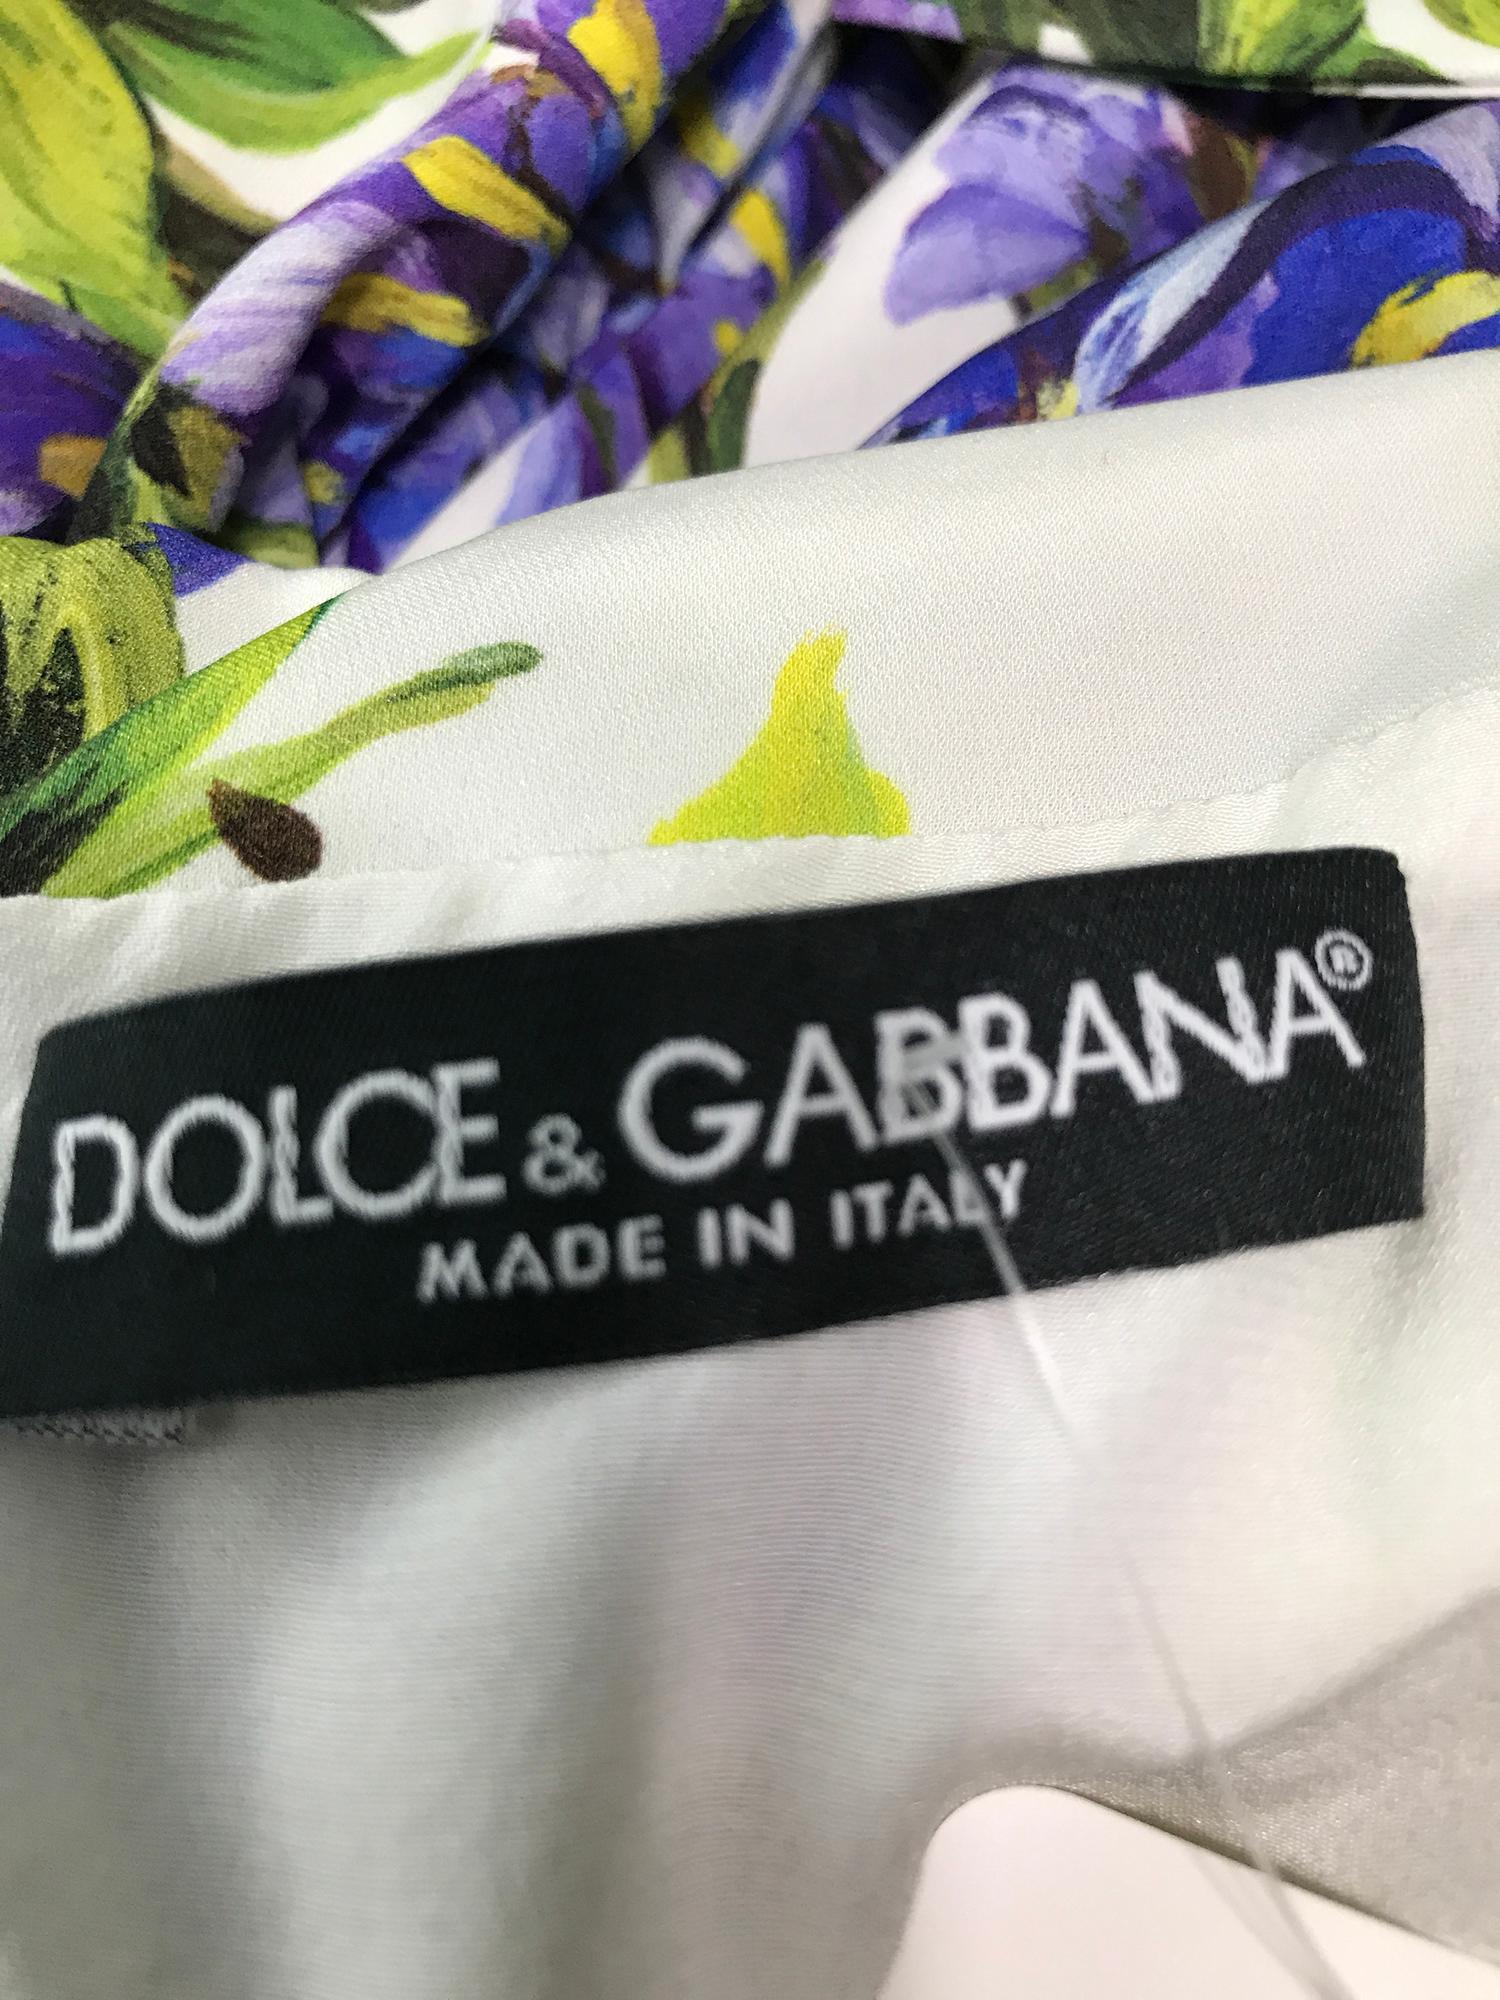 Dolce & Gabbana Wisteria Print Side Ruched Dress in White & Lavender 2